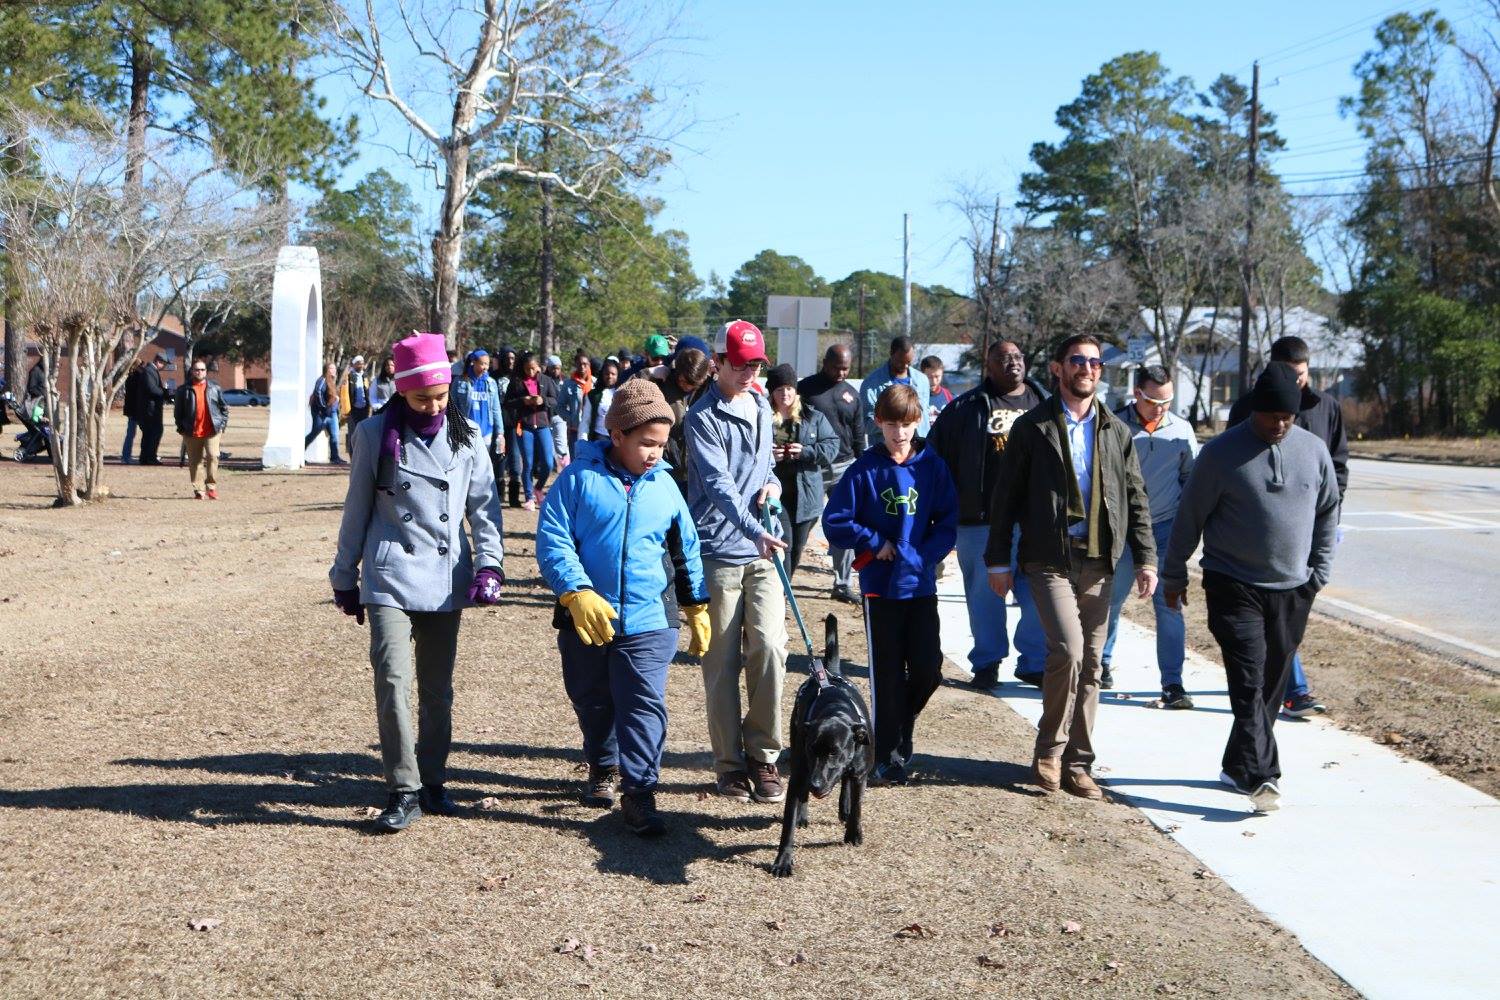 The MLK Jr. Day march began at approximately 11:45am in front of Brewton-Parker College’s Gates Hall. People of all ages attended. Photo cred: Jose Carrillo-Garcia